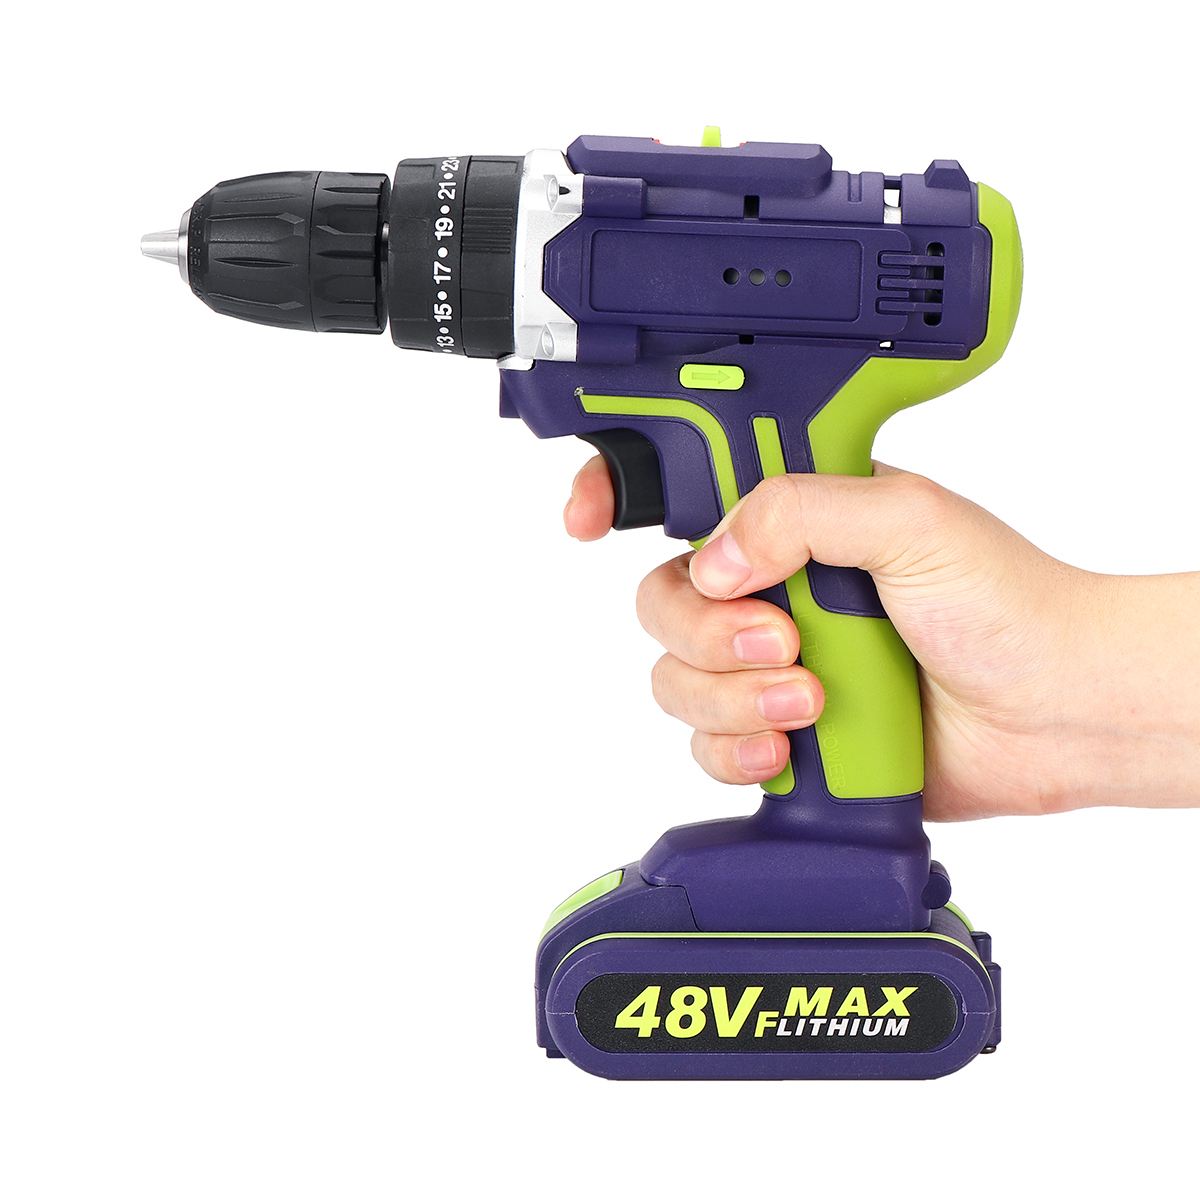 100-240V-50Nm-3-In-1-Electric-Hammer-Drill-Cordless-Drill-Double-Speed-Power-Drills-1809843-15